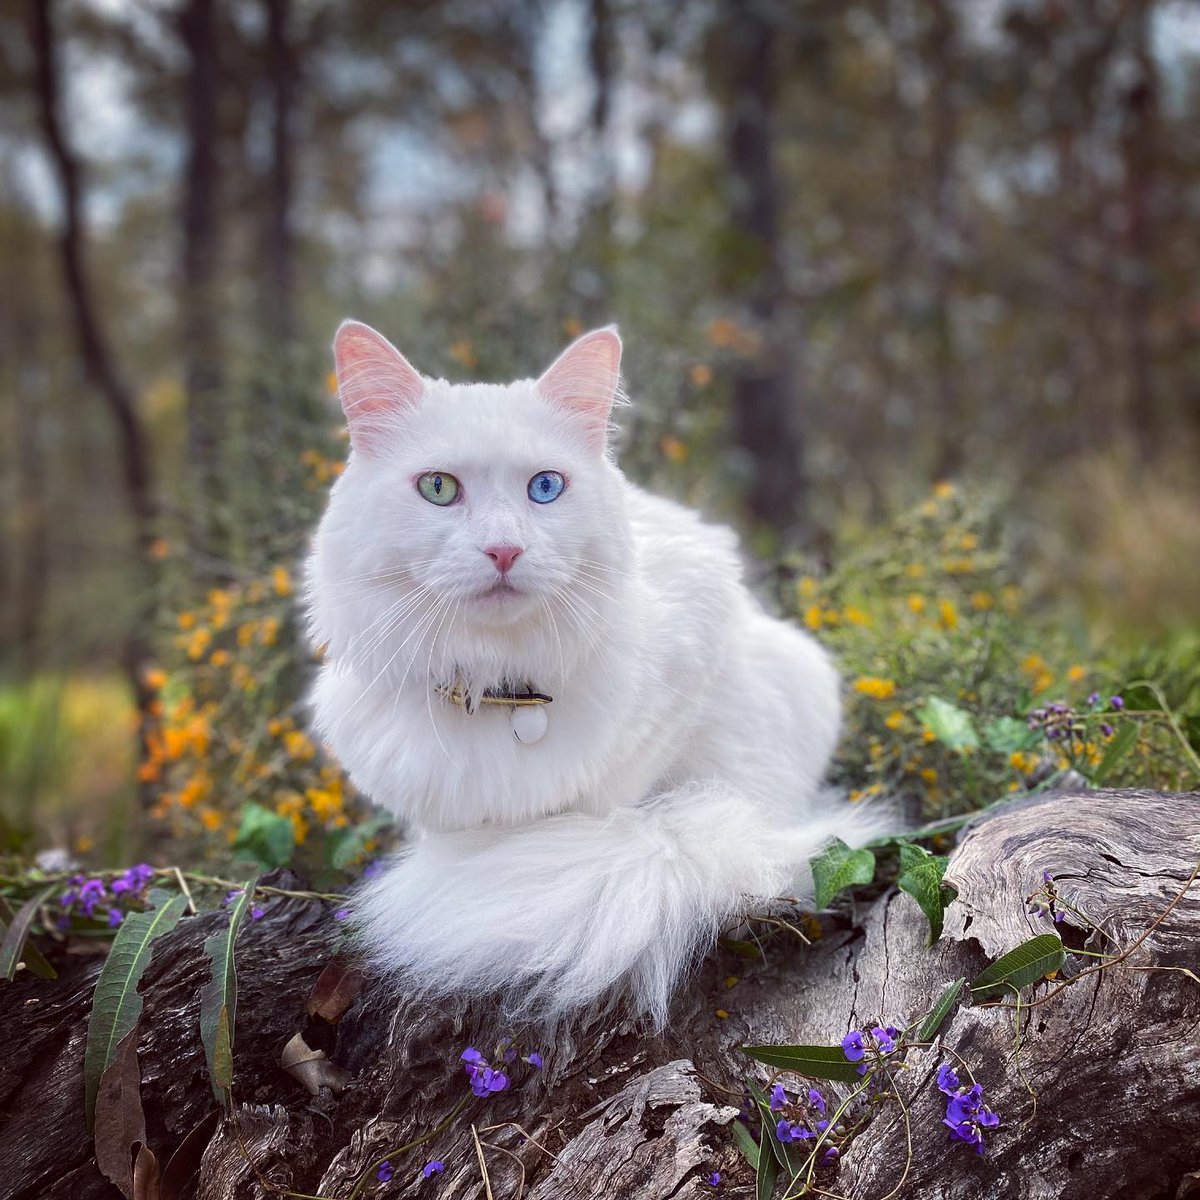 Look at our Fur Friend Soda Pop @skittles_and_gingin bringing us all of the May flowers 💐 🌷 🌹 🌼 🌺 🌸 

#EvolvePets #ChooseEvolve #MajesticMay